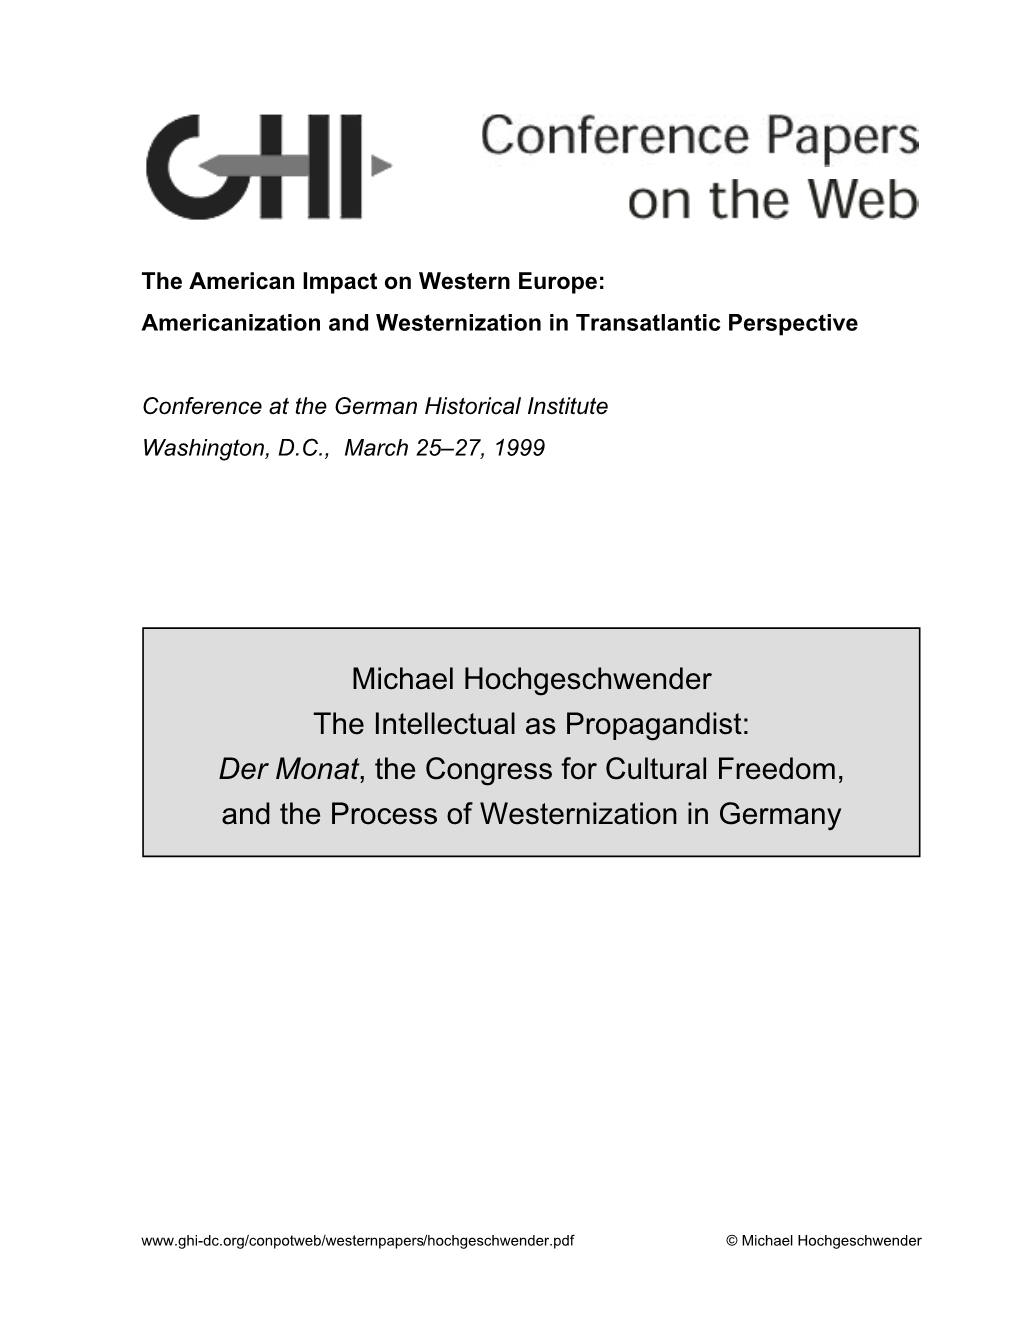 Michael Hochgeschwender the Intellectual As Propagandist: Der Monat, the Congress for Cultural Freedom, and the Process of Westernization in Germany